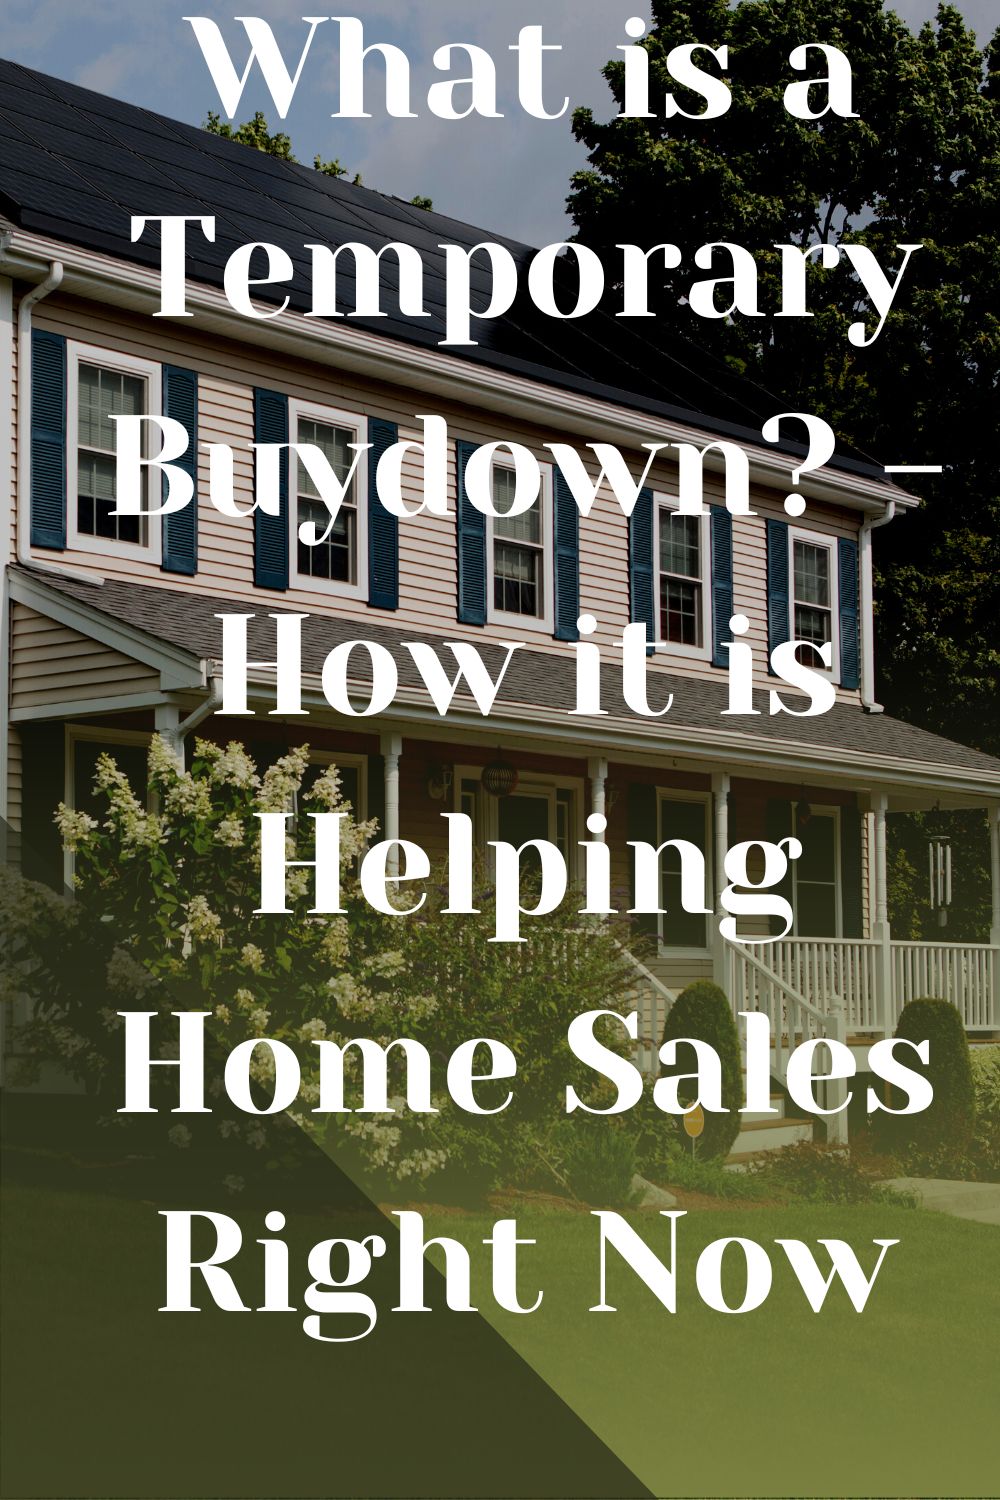 What is a Temporary Buydown? - How it is Helping Home Sales Right Now